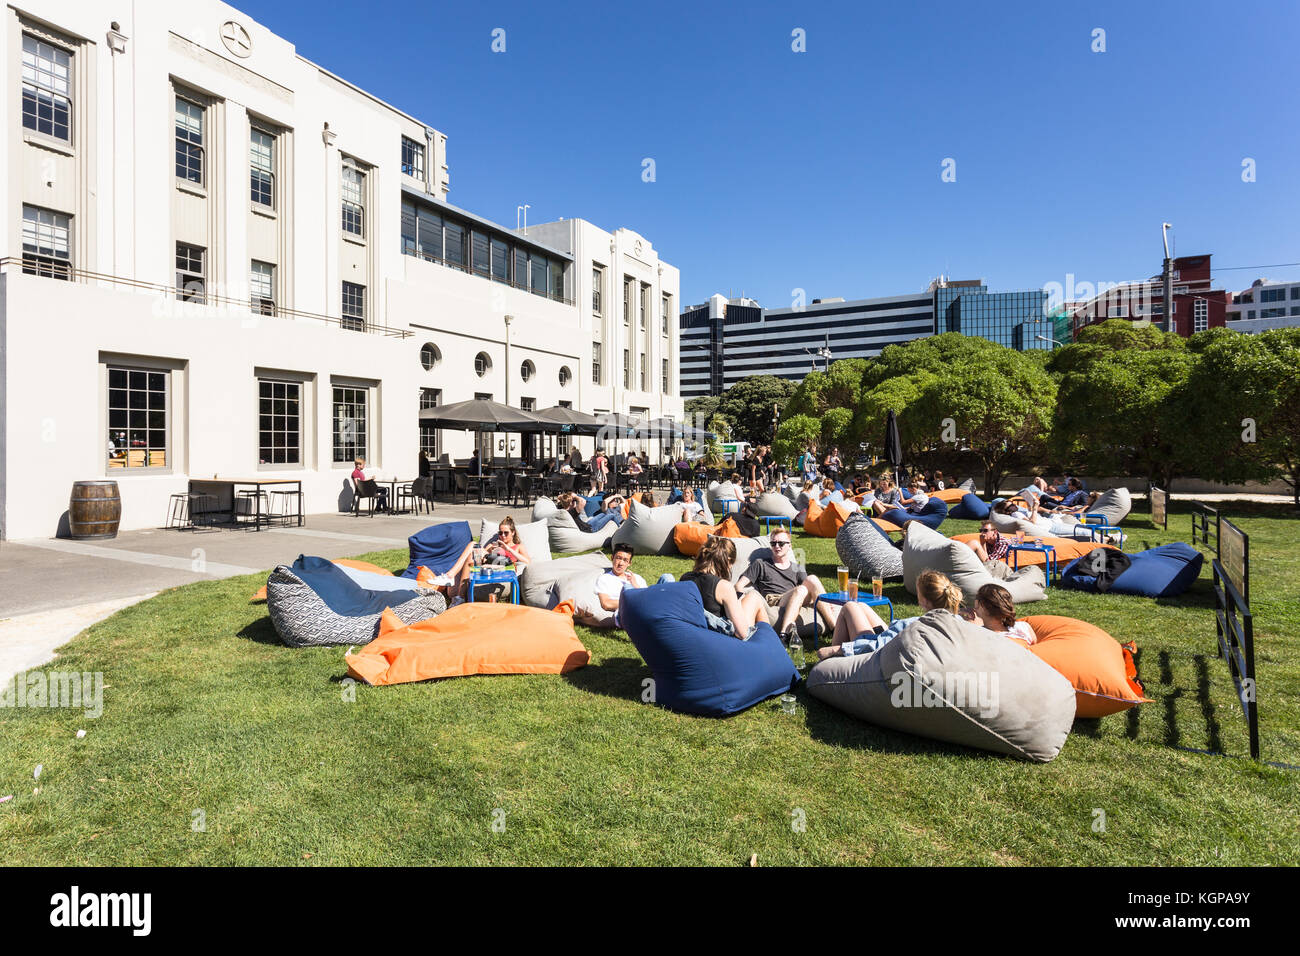 WELLINGTON, NEW ZEALAND - MARCH 1, 2017: People enjoy a drink on a outdoor terrace in a garden in downtown Wellington in summer in New Zealand capital Stock Photo